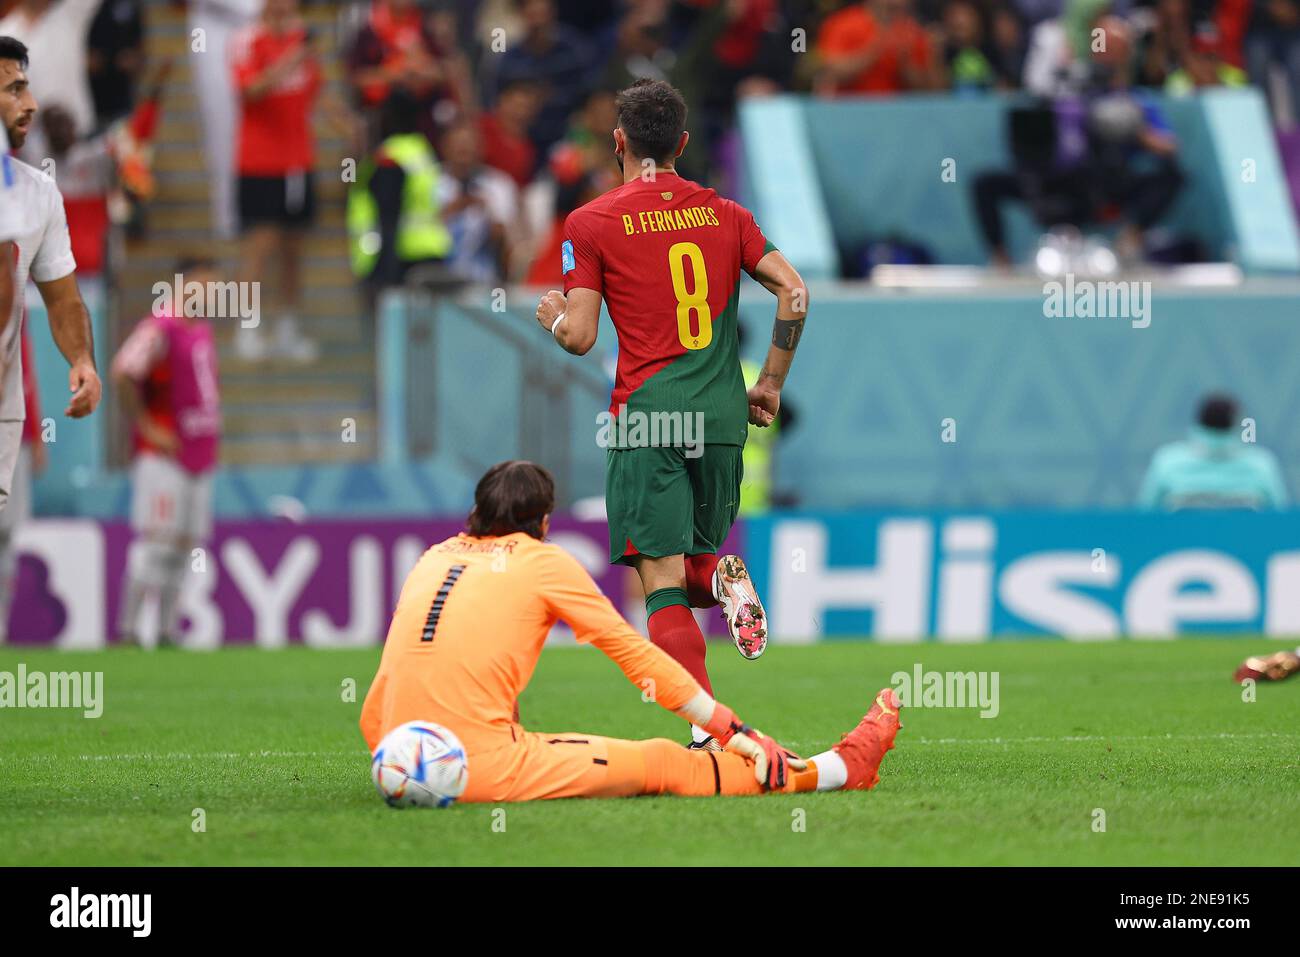 LUSAIL CITY, QATAR - DECEMBER 06: Yann Sommer, Bruno Fernandes during the FIFA World Cup Qatar 2022 Round of 16 match between Portugal and Switzerland at Lusail Stadium on December 6, 2022 in Lusail City, Qatar. (Photo by MB Media) Stock Photo